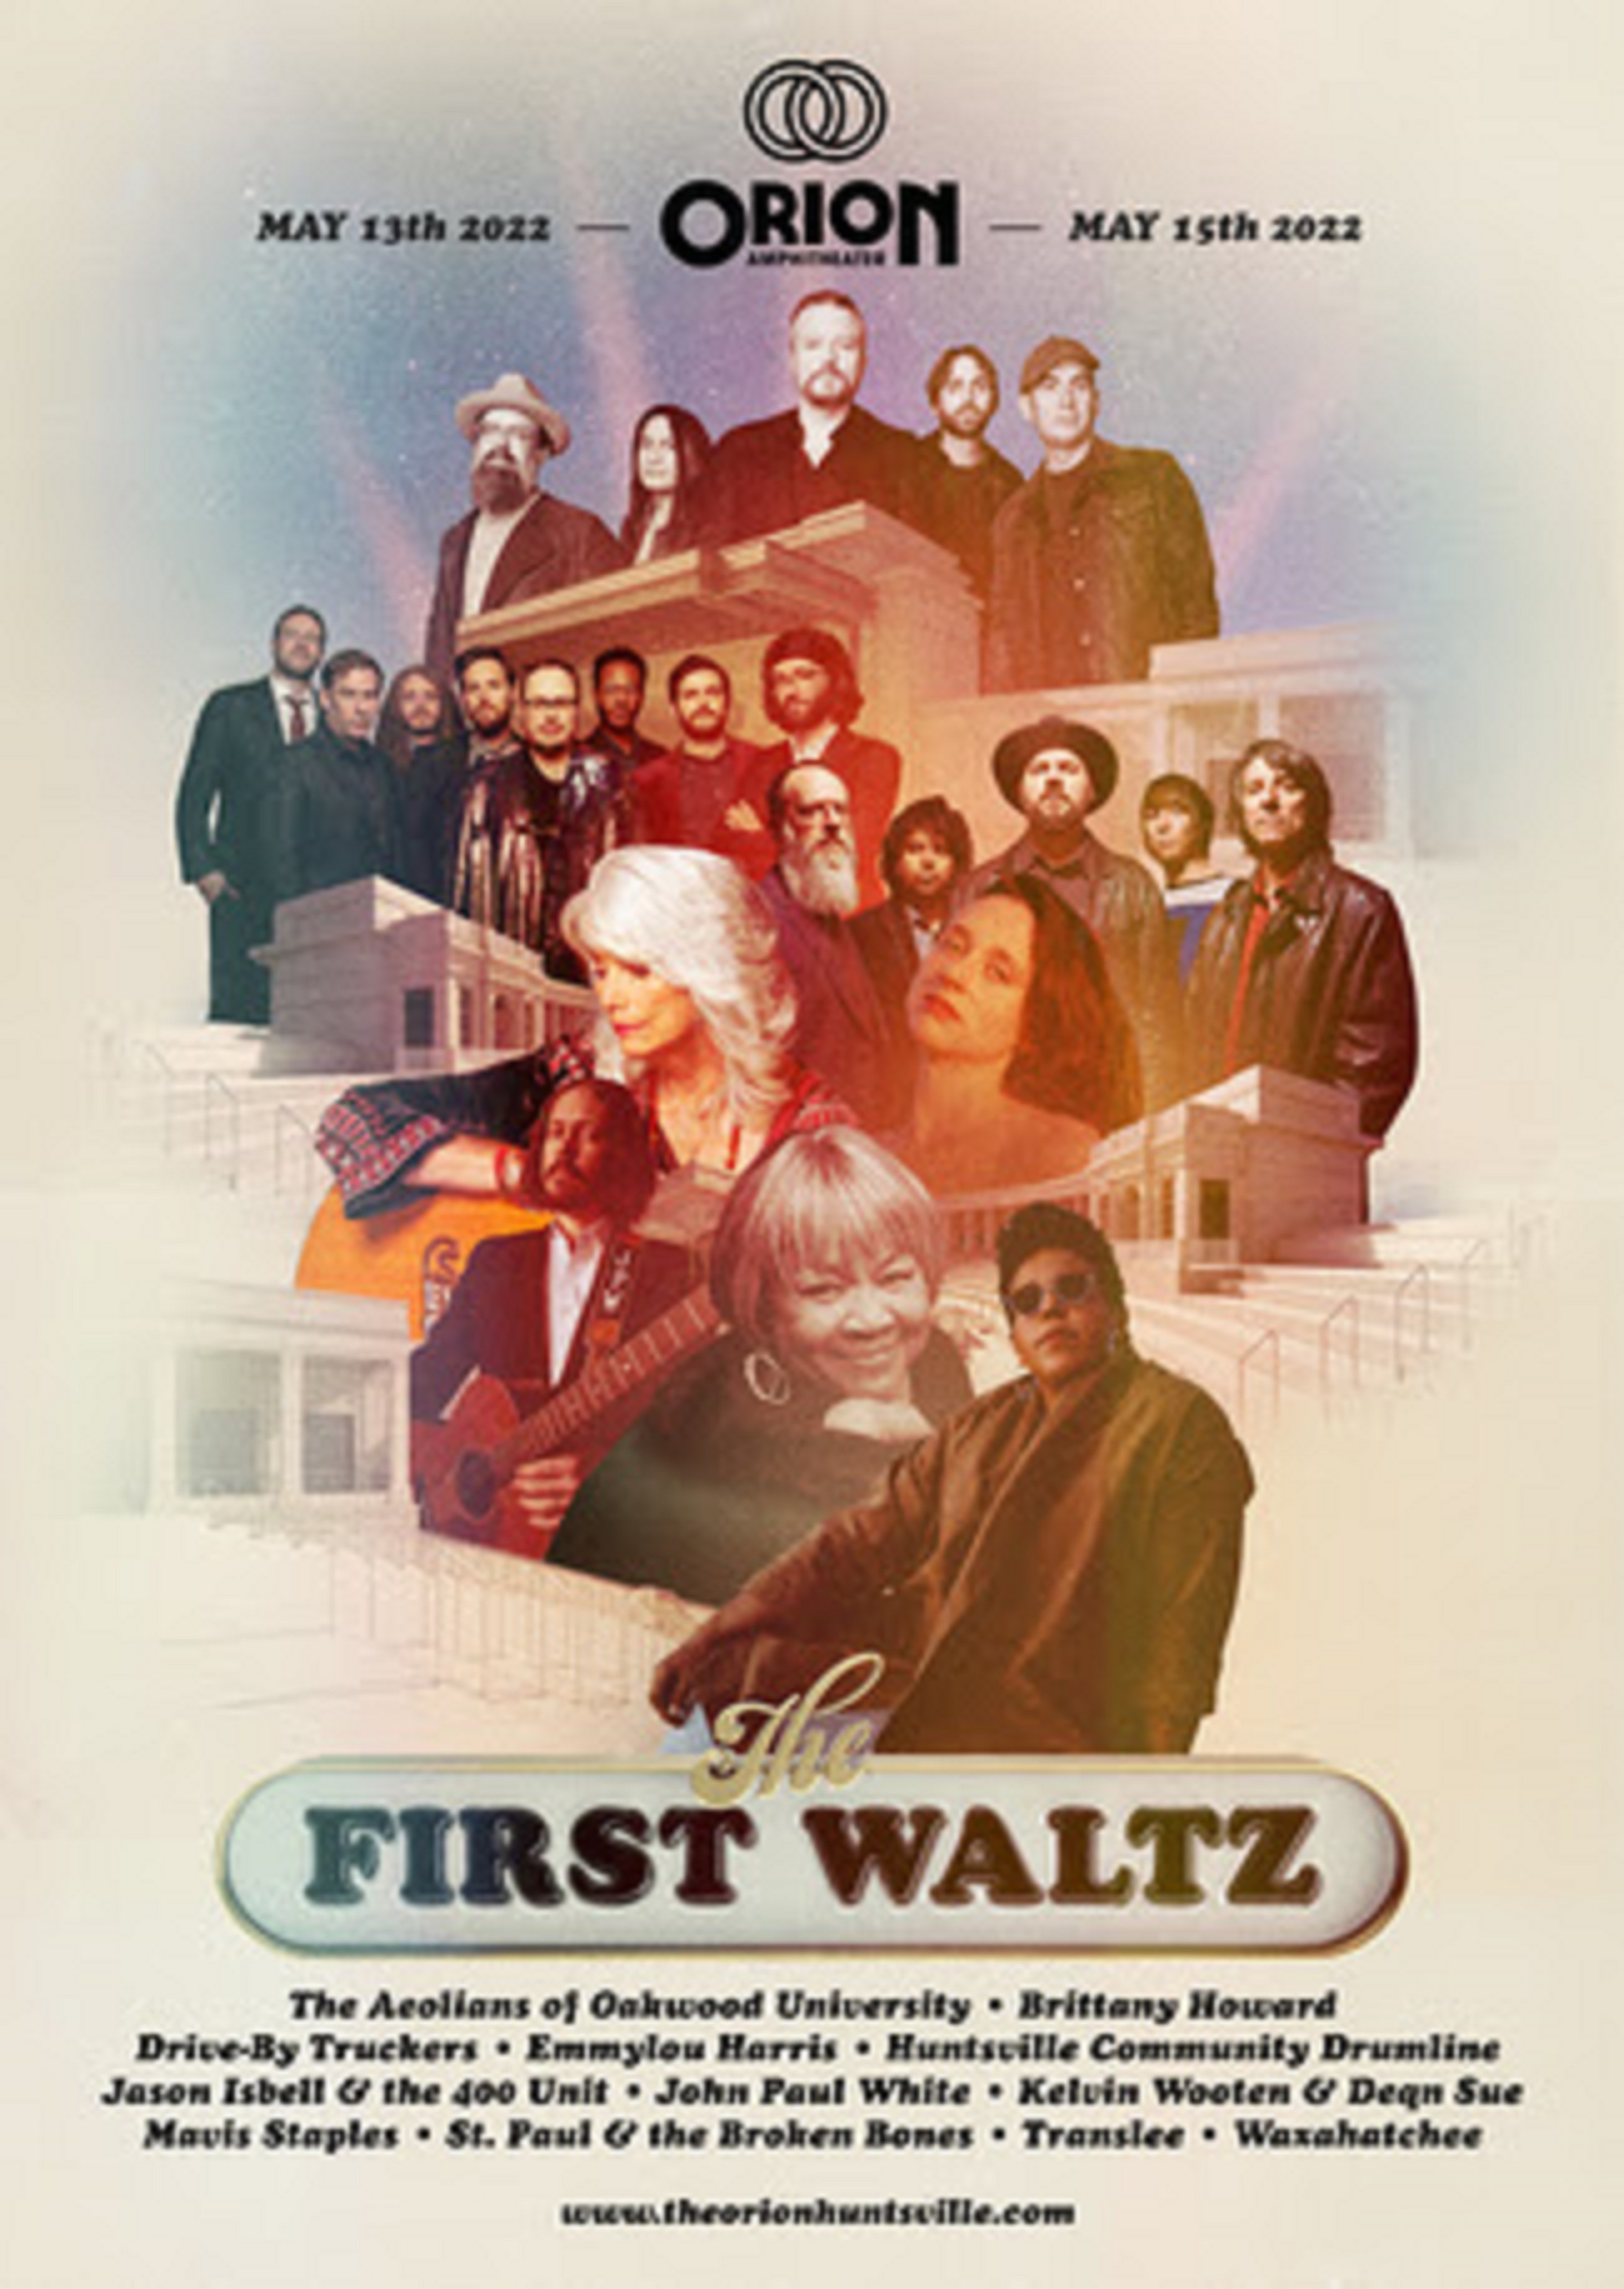 Brittany Howard, Drive-By Truckers, Emmylou Harris, Jason Isbell and the 400 Unit, Mavis Staples all confirmed for The First Waltz